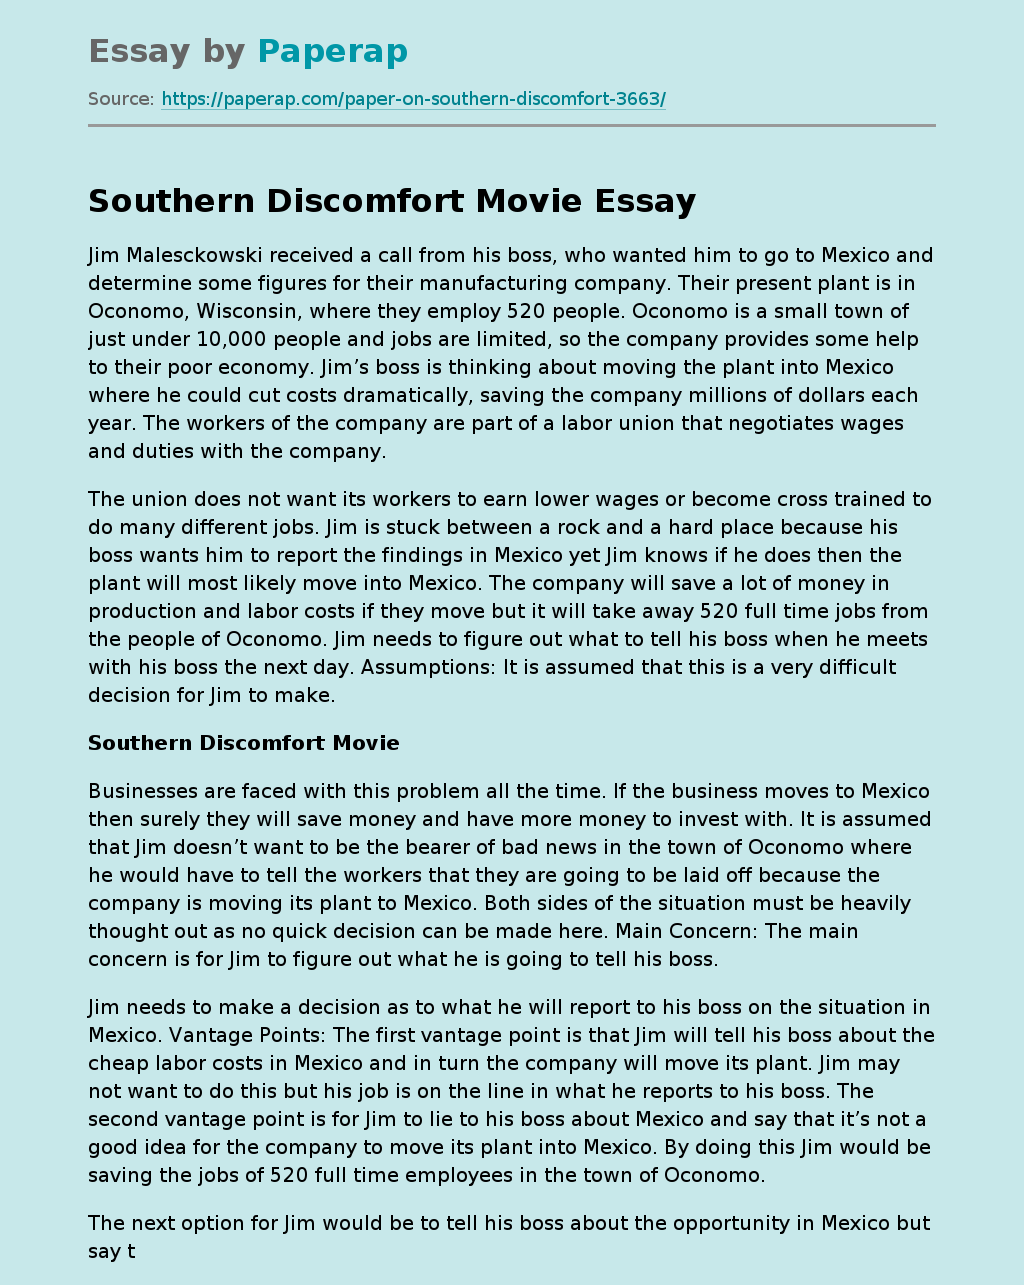 "Southern Discomfort" Movie